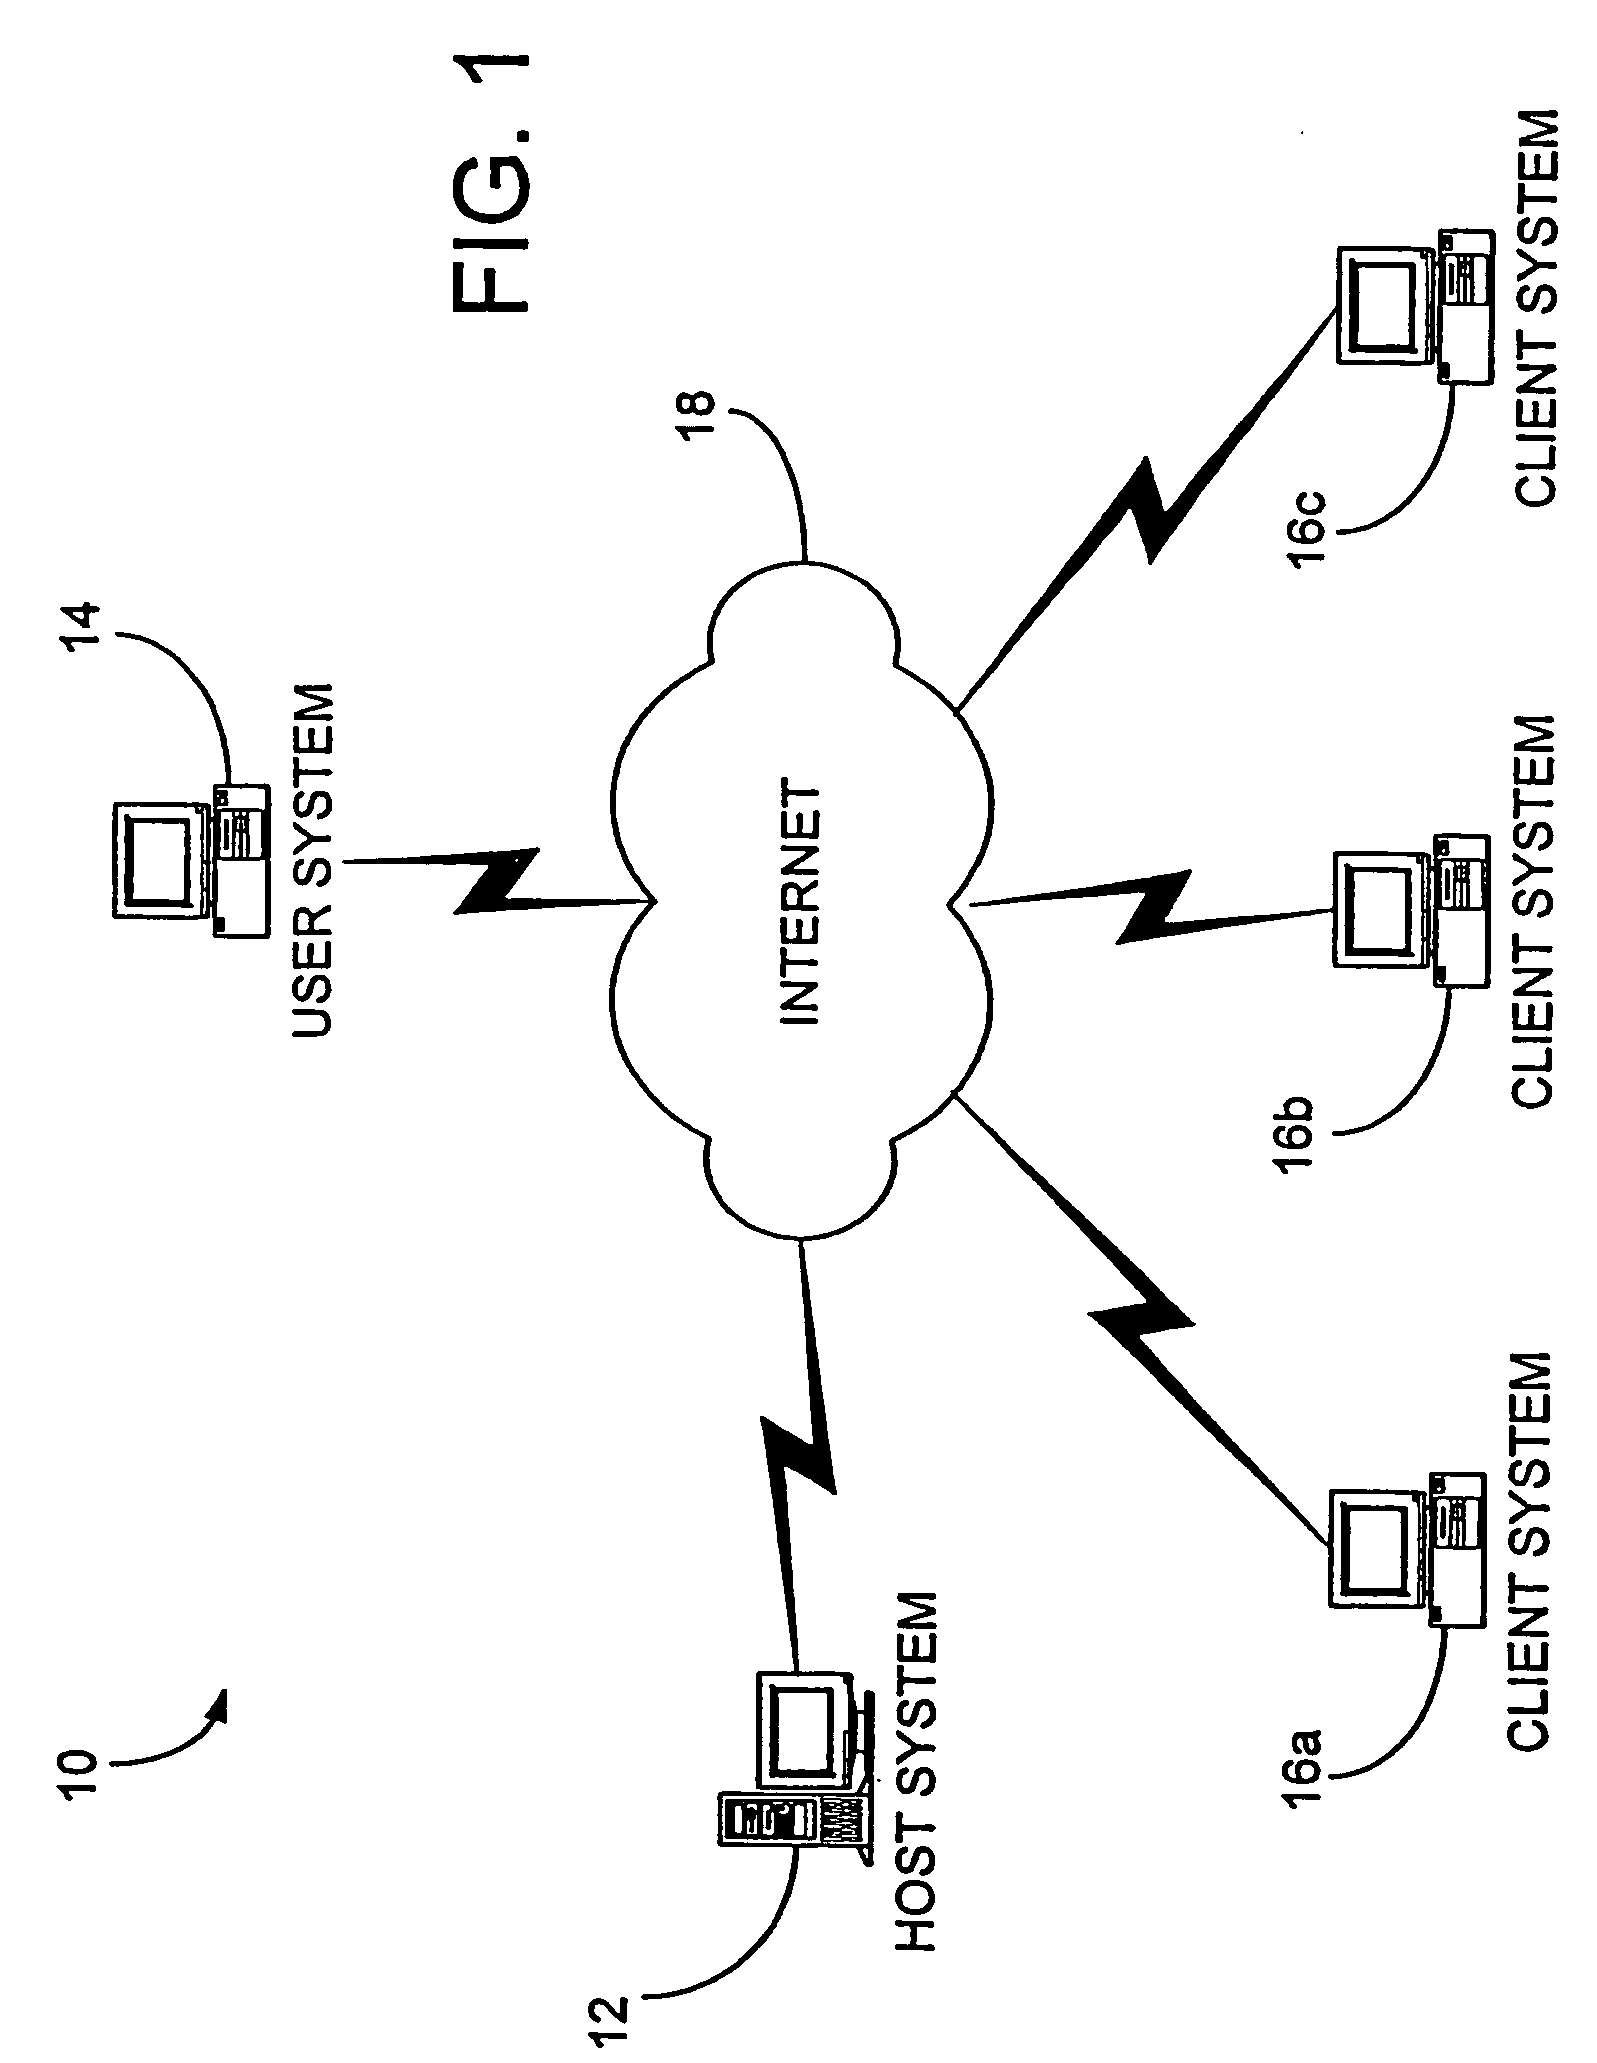 Method of and system for determining connections between parties using private links